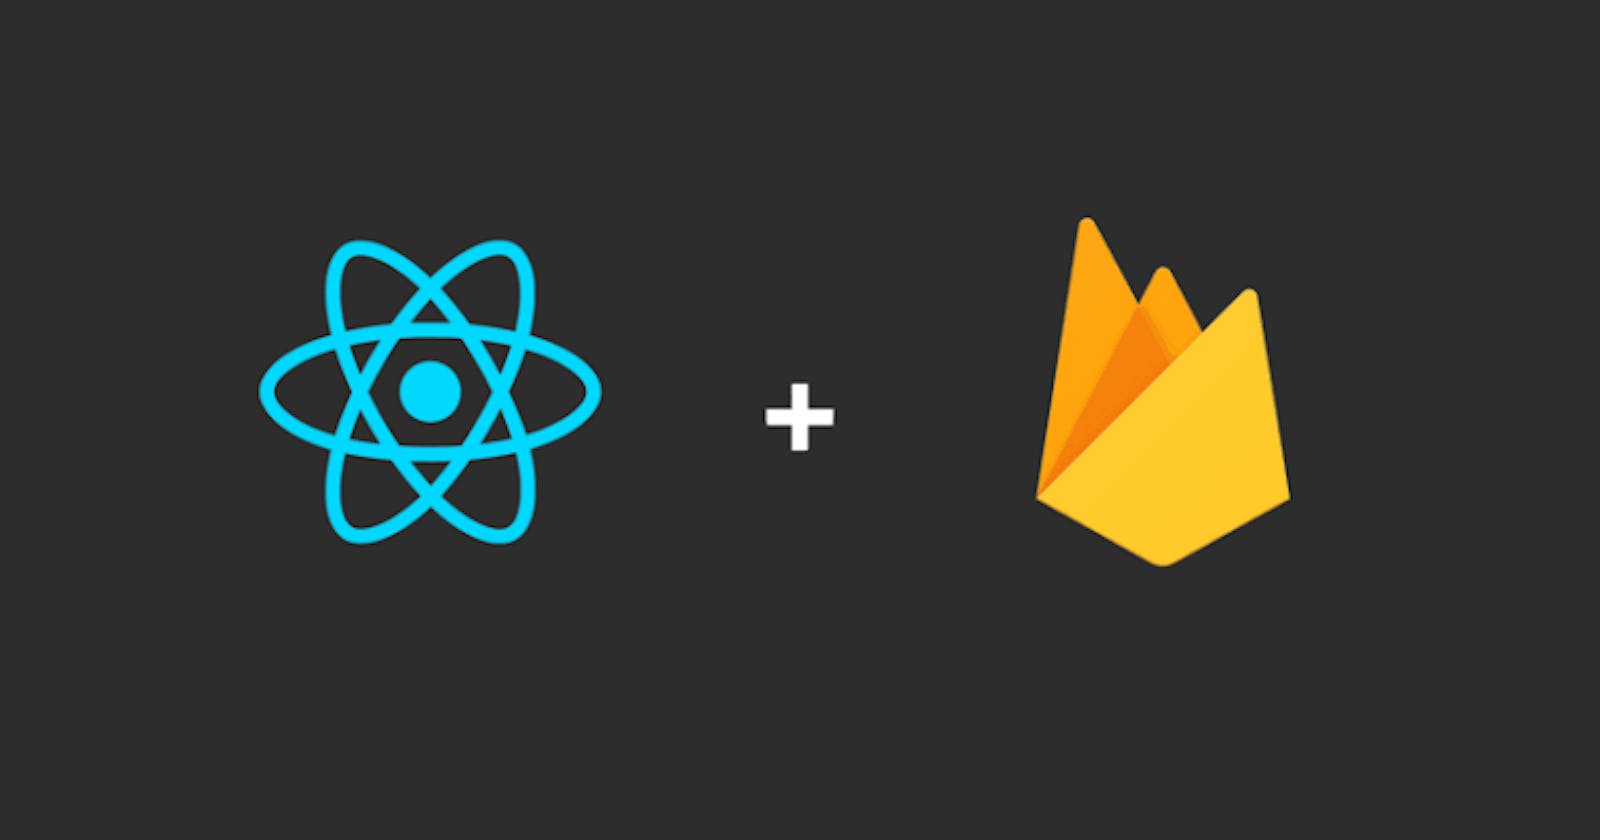 Building a React Project - Implementing some important React Features and hosting with Firebase.